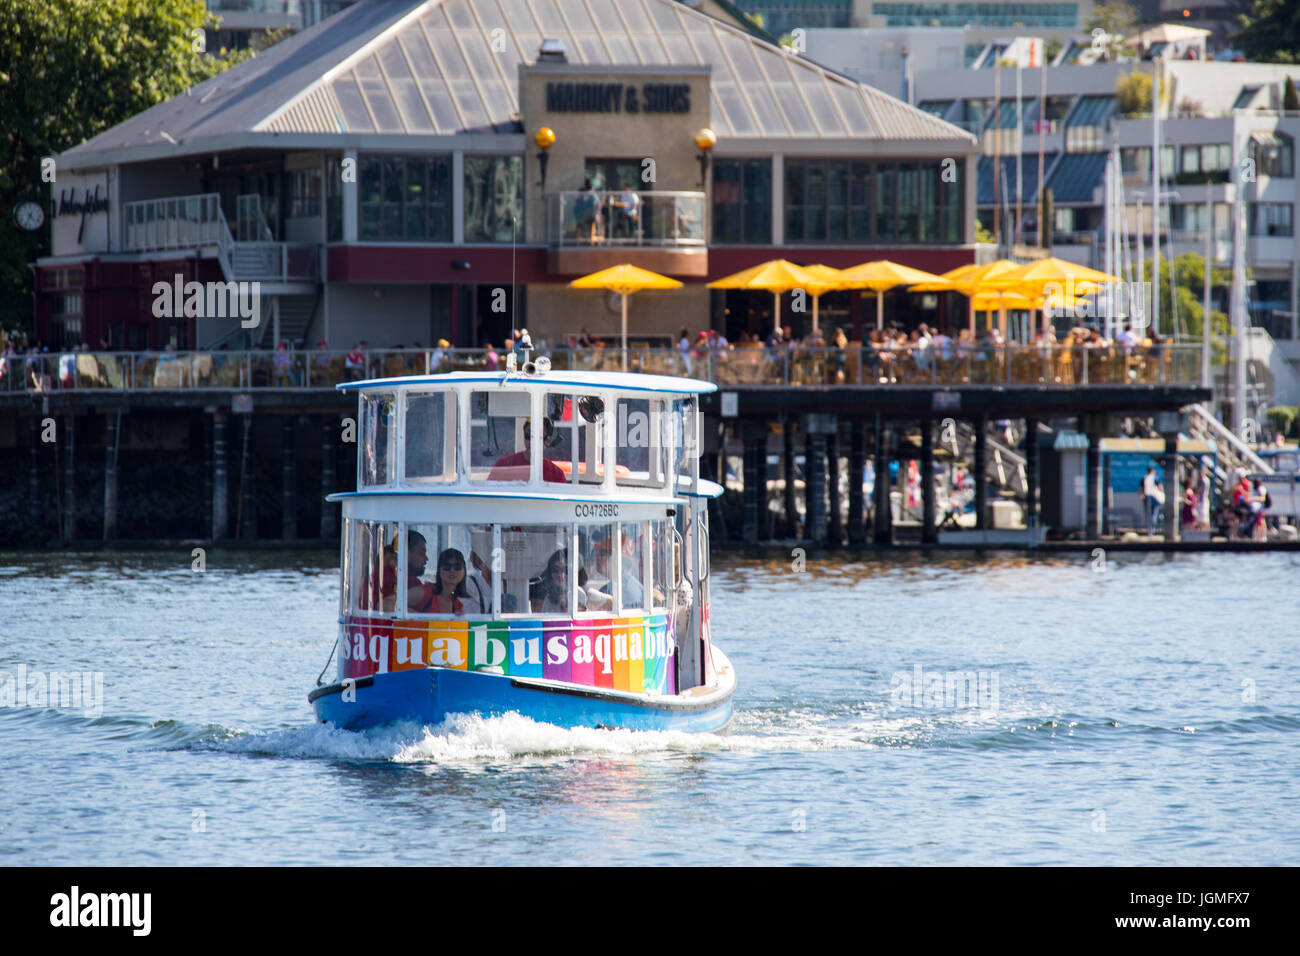 Aquabus, Tourist boat in False Creek, pulling away from Mahony & Sons Restaurant, Stamps Landing, Vancouver, Canada Stock Photo